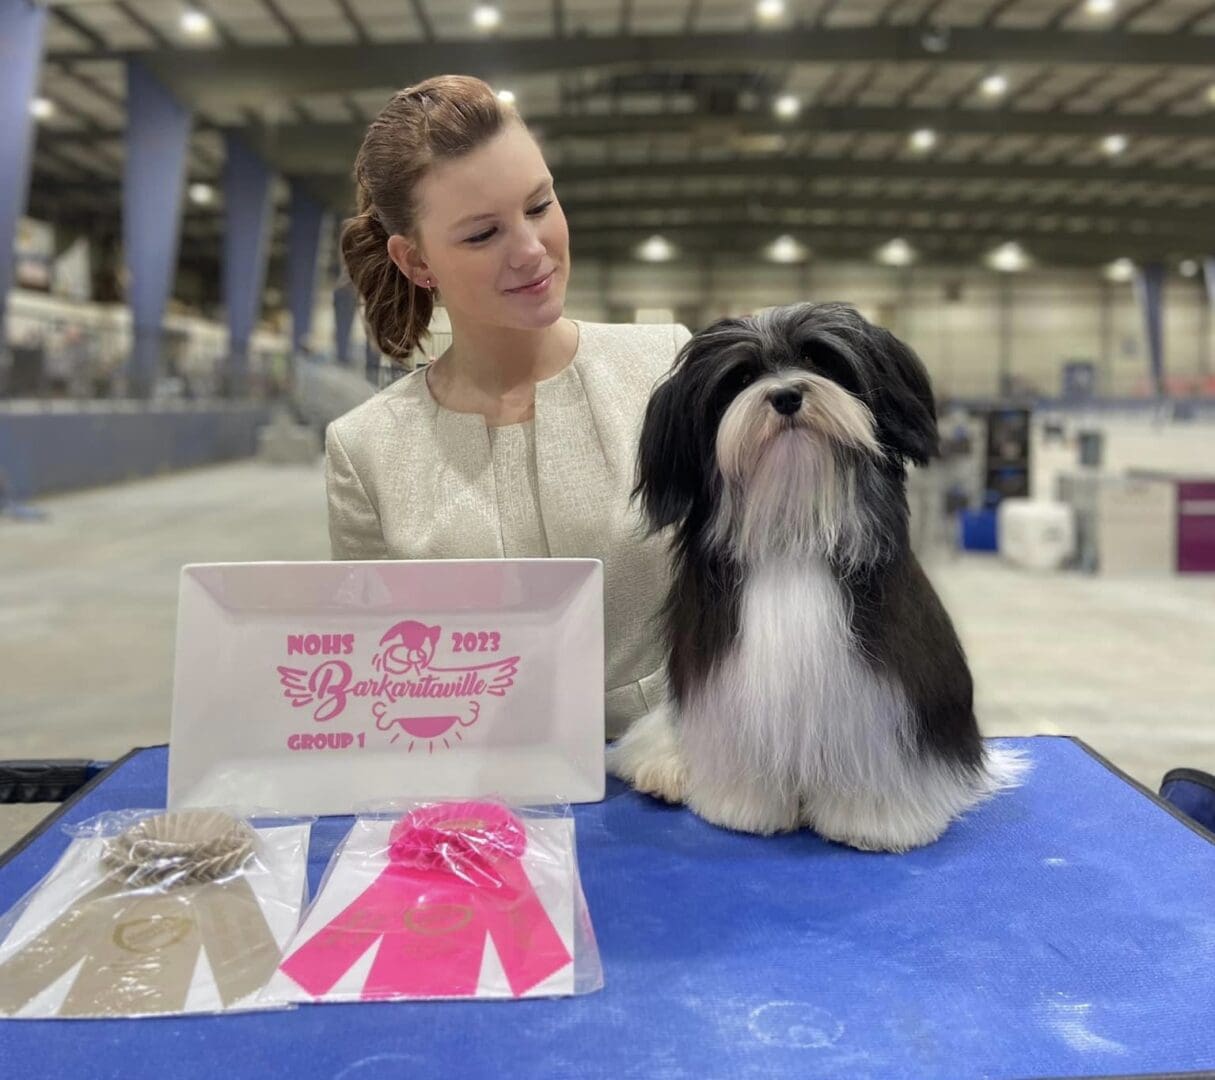 A woman is standing next to a Havanese at a dog show.